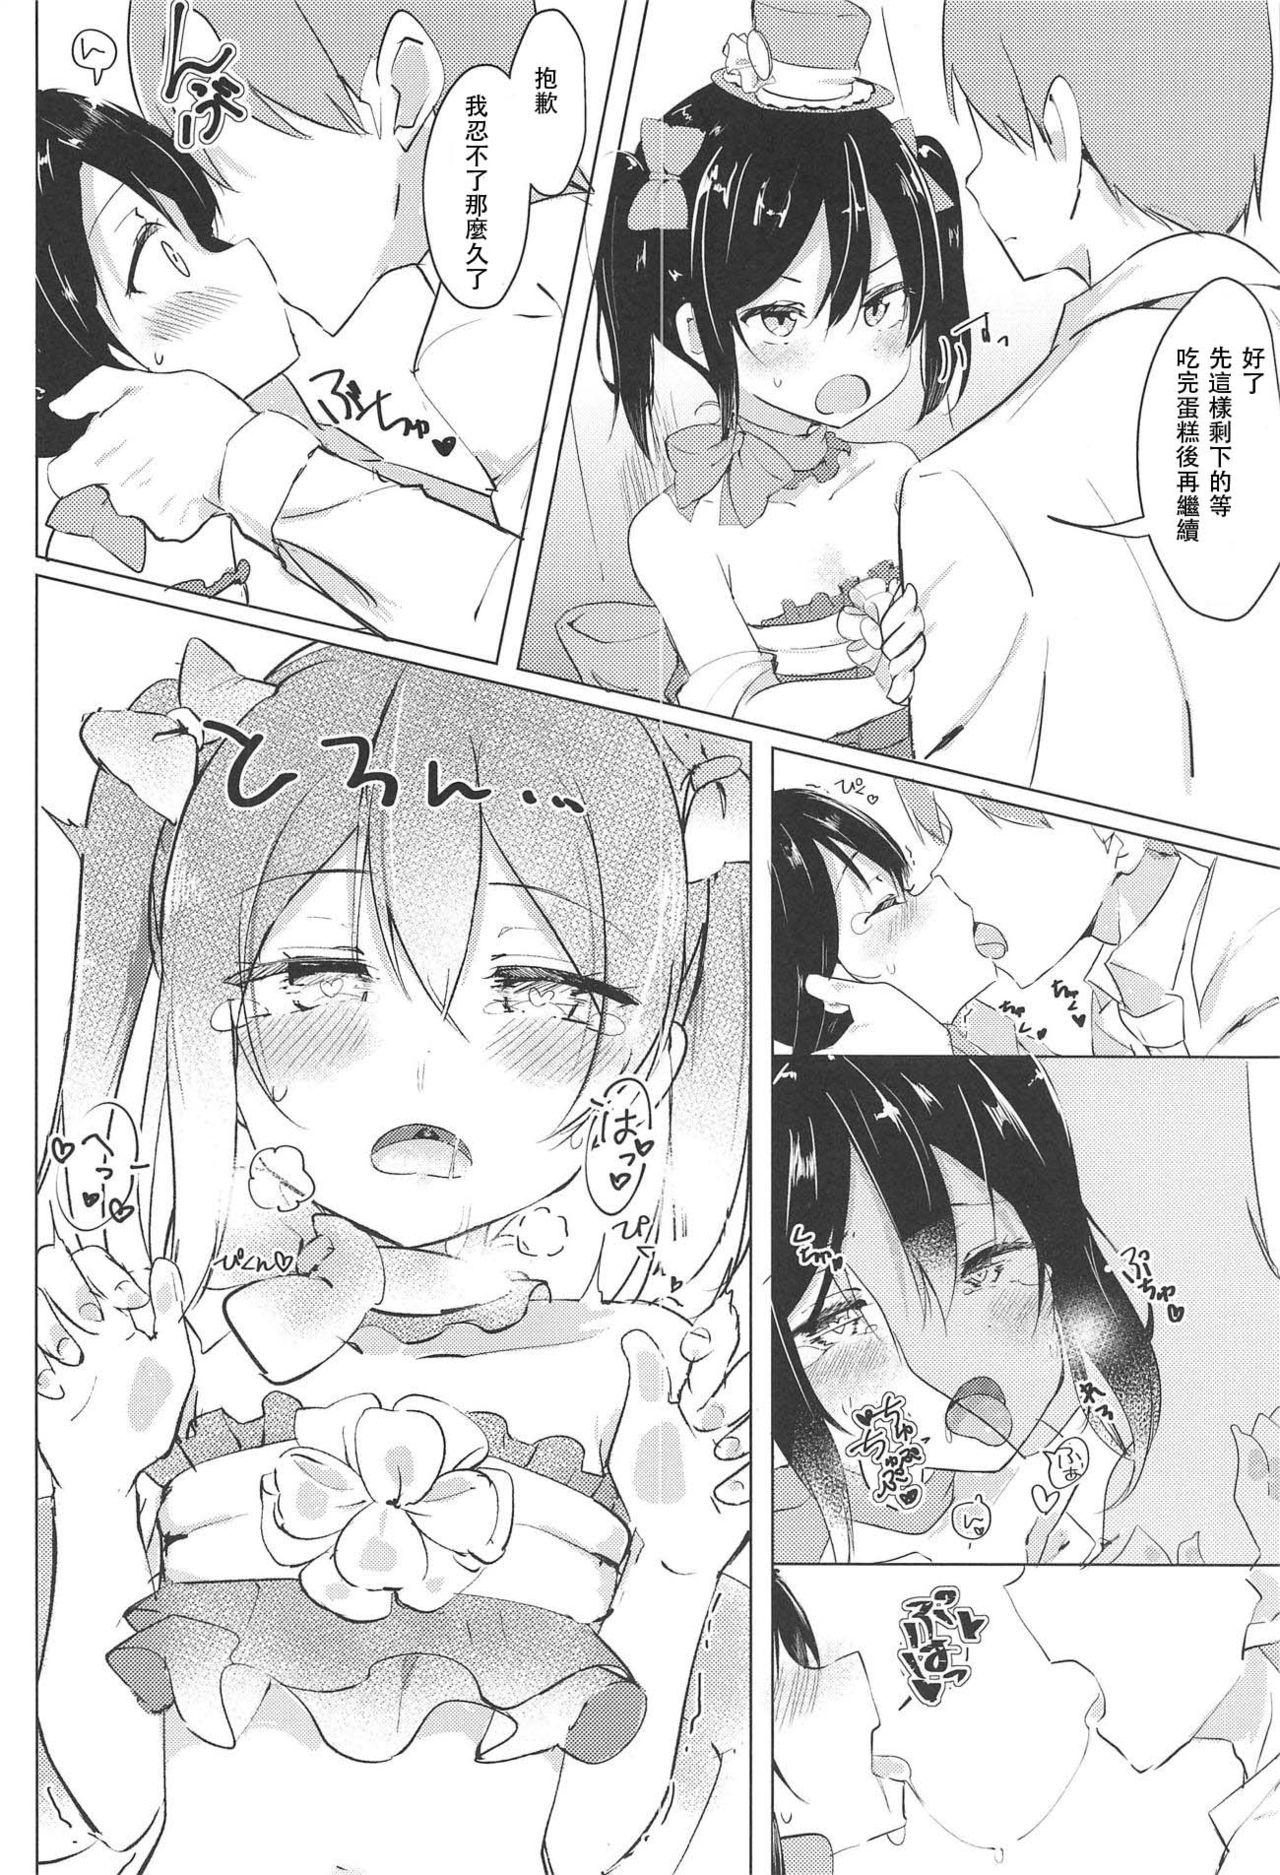 Soloboy Smile for you. - Love live Toying - Page 8